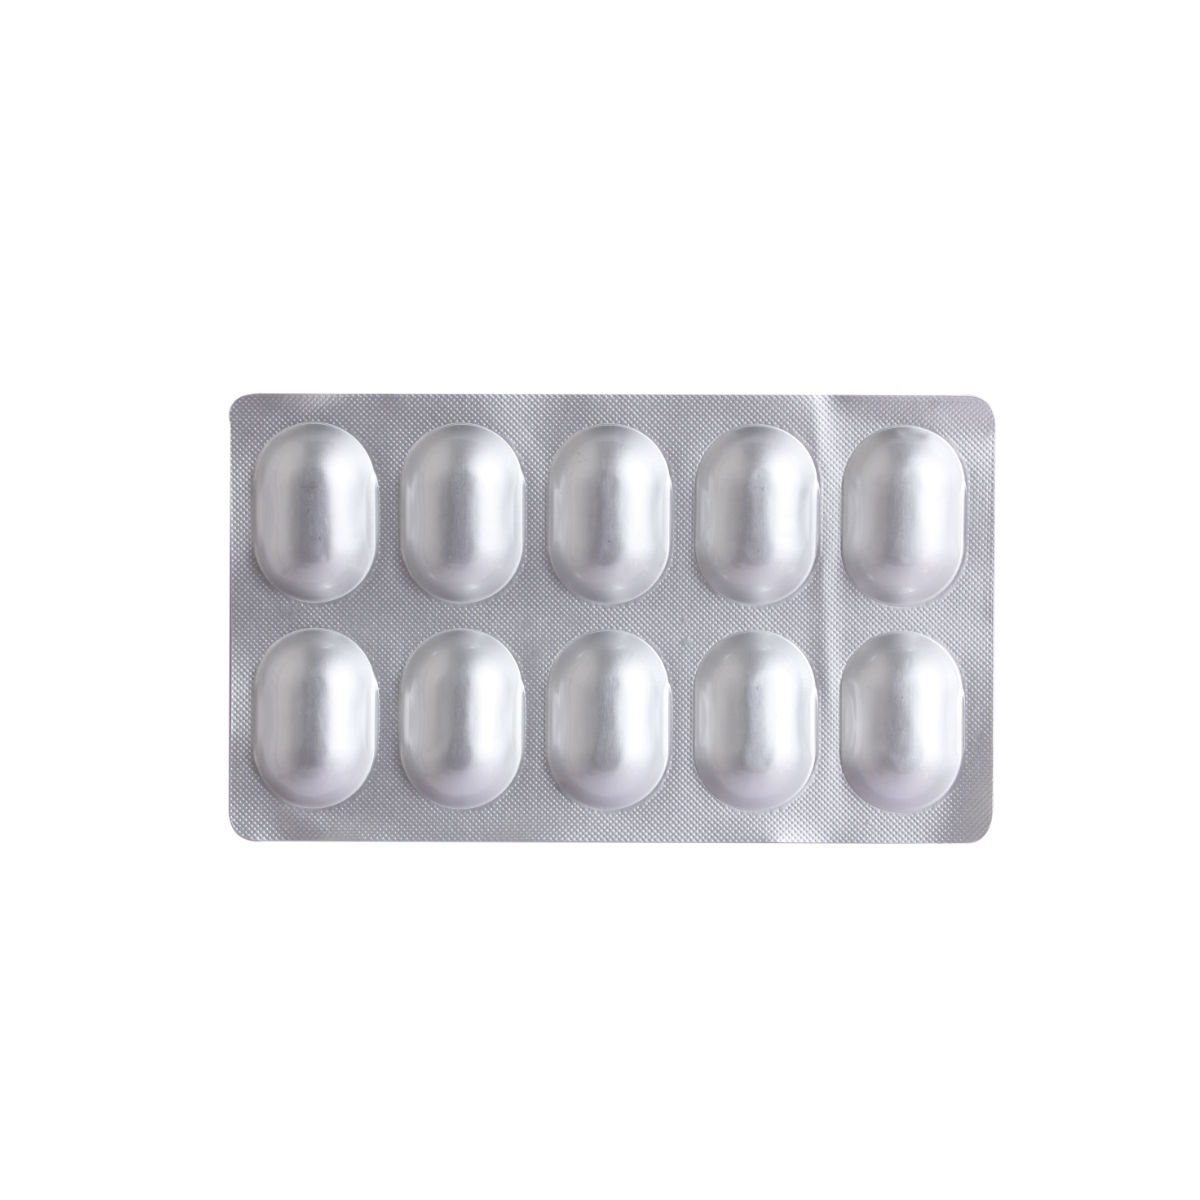 Dapaone M 10/500 Tablet 10's, Pack of 10 TABLETS